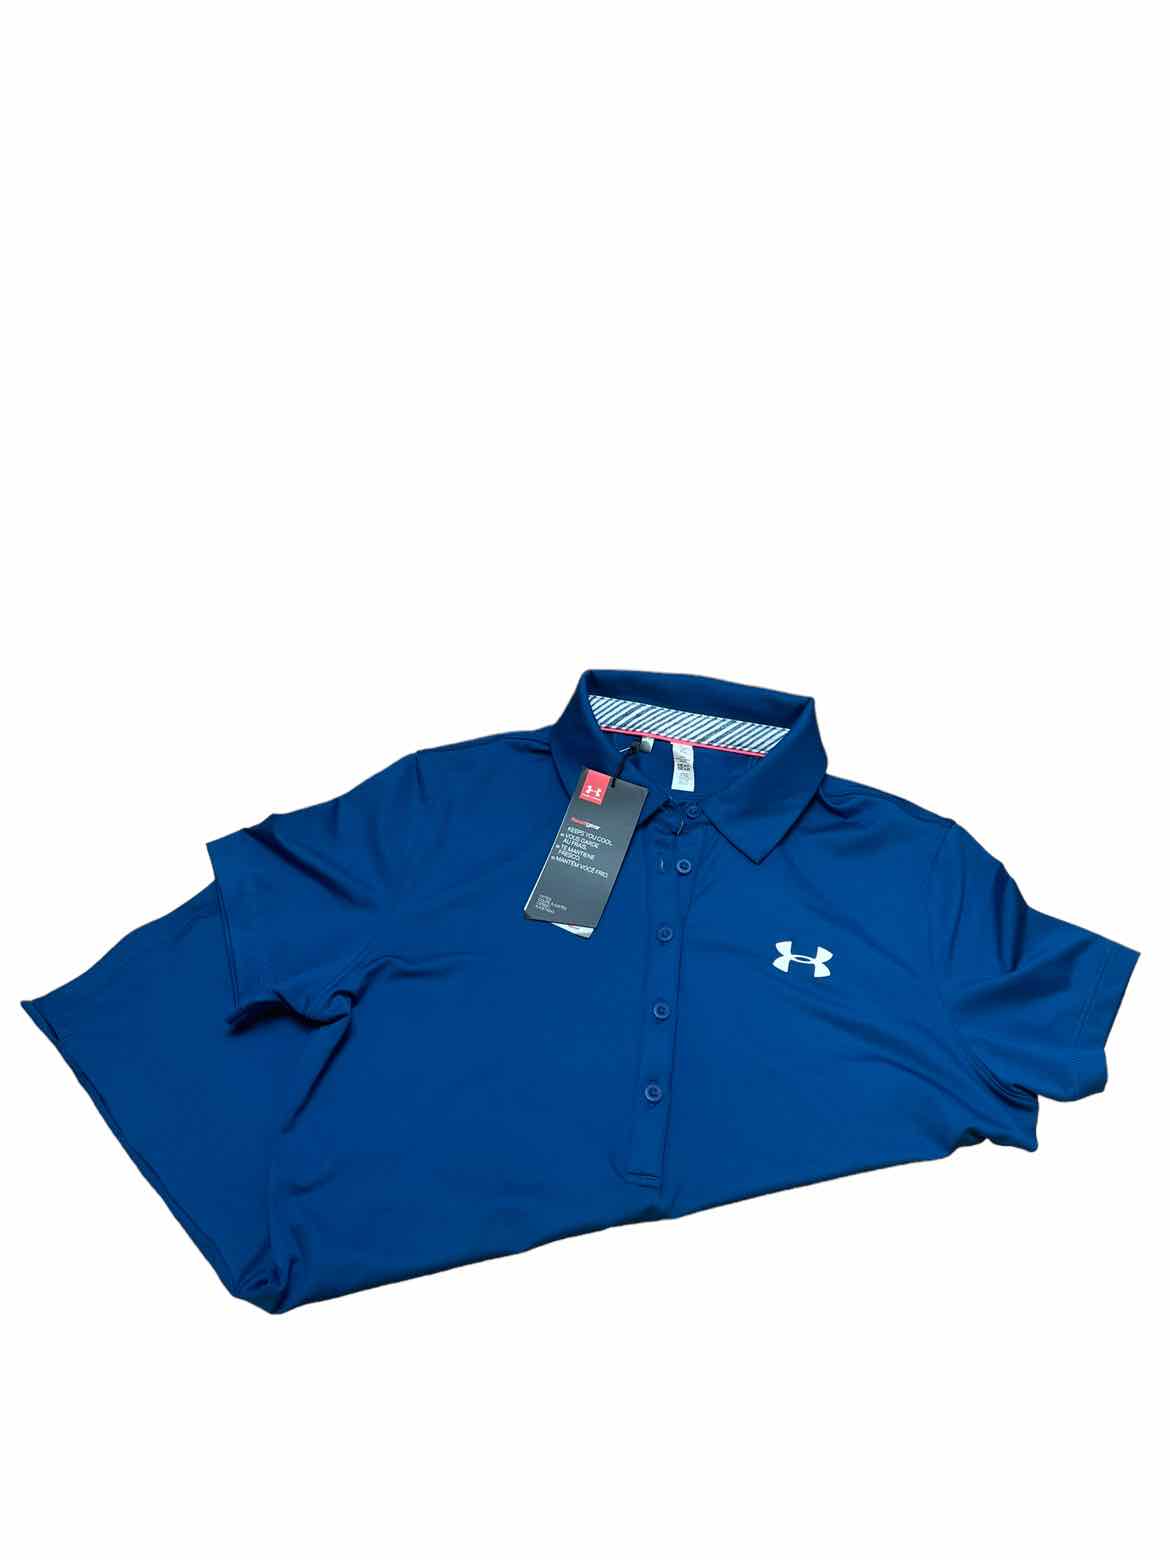 Under Armour Size S Blue Polyester logo Active Wear Shirt